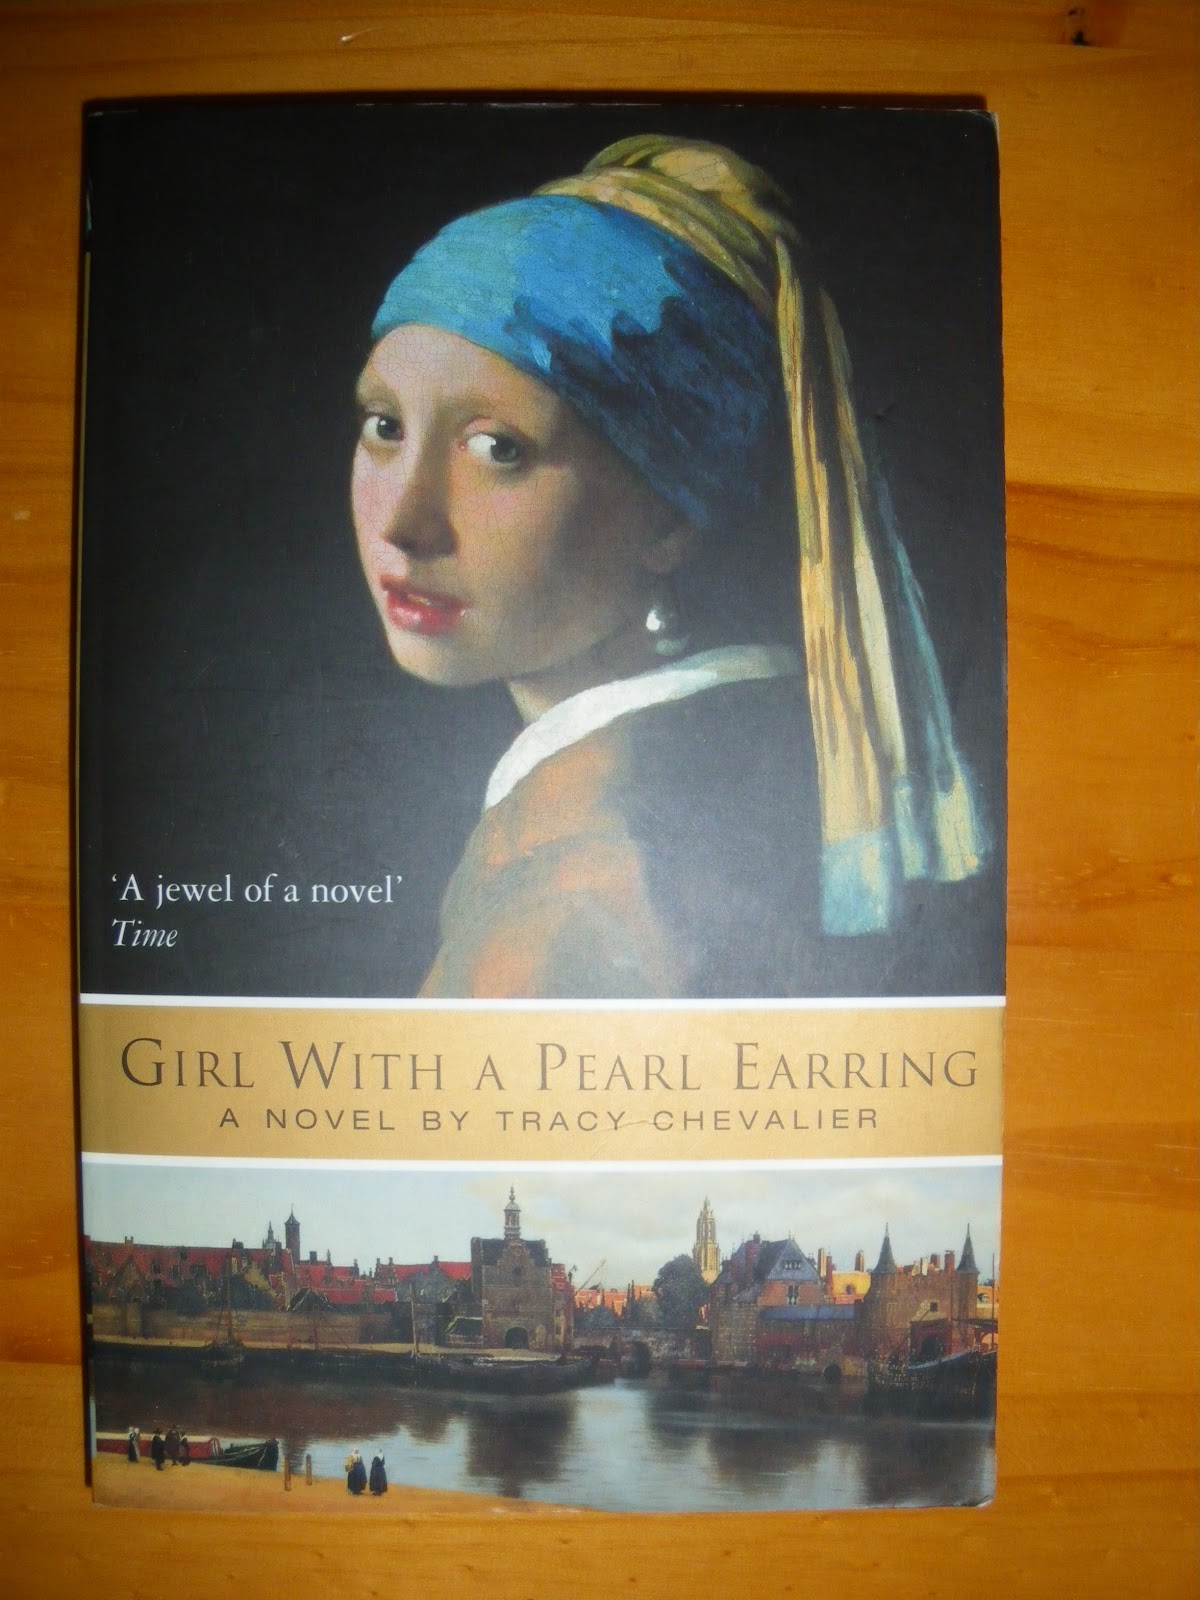 ENGLISH BOOKS: GIRL WITH A PEARL EARRING, TRACY CHEVALIER.